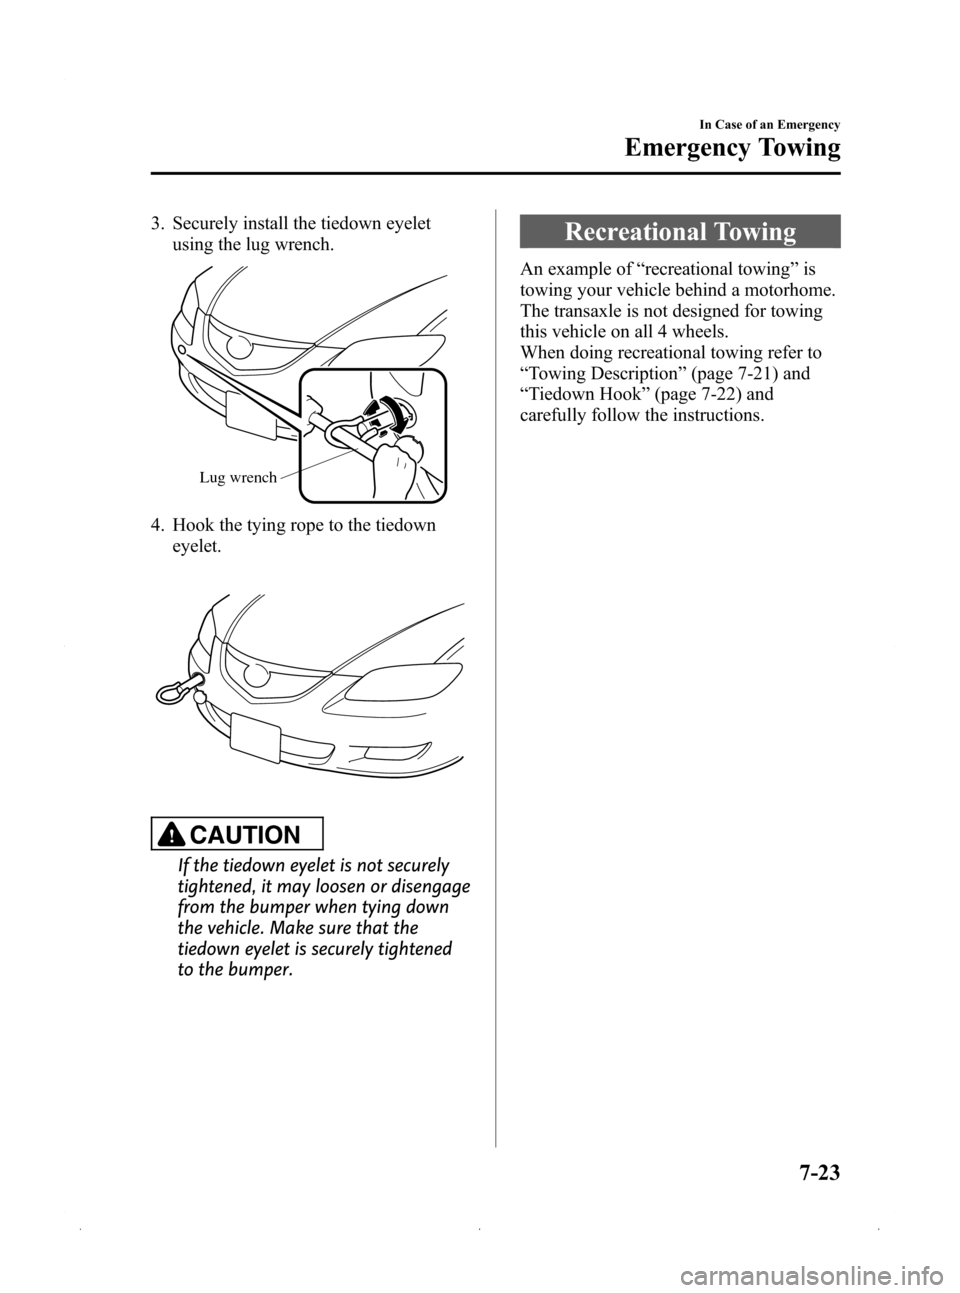 MAZDA MODEL 3 HATCHBACK 2009  Owners Manual (in English) Black plate (285,1)
3. Securely install the tiedown eyeletusing the lug wrench.
Lug wrench
4. Hook the tying rope to the tiedown
eyelet.
CAUTION
If the tiedown eyelet is not securely
tightened, it may